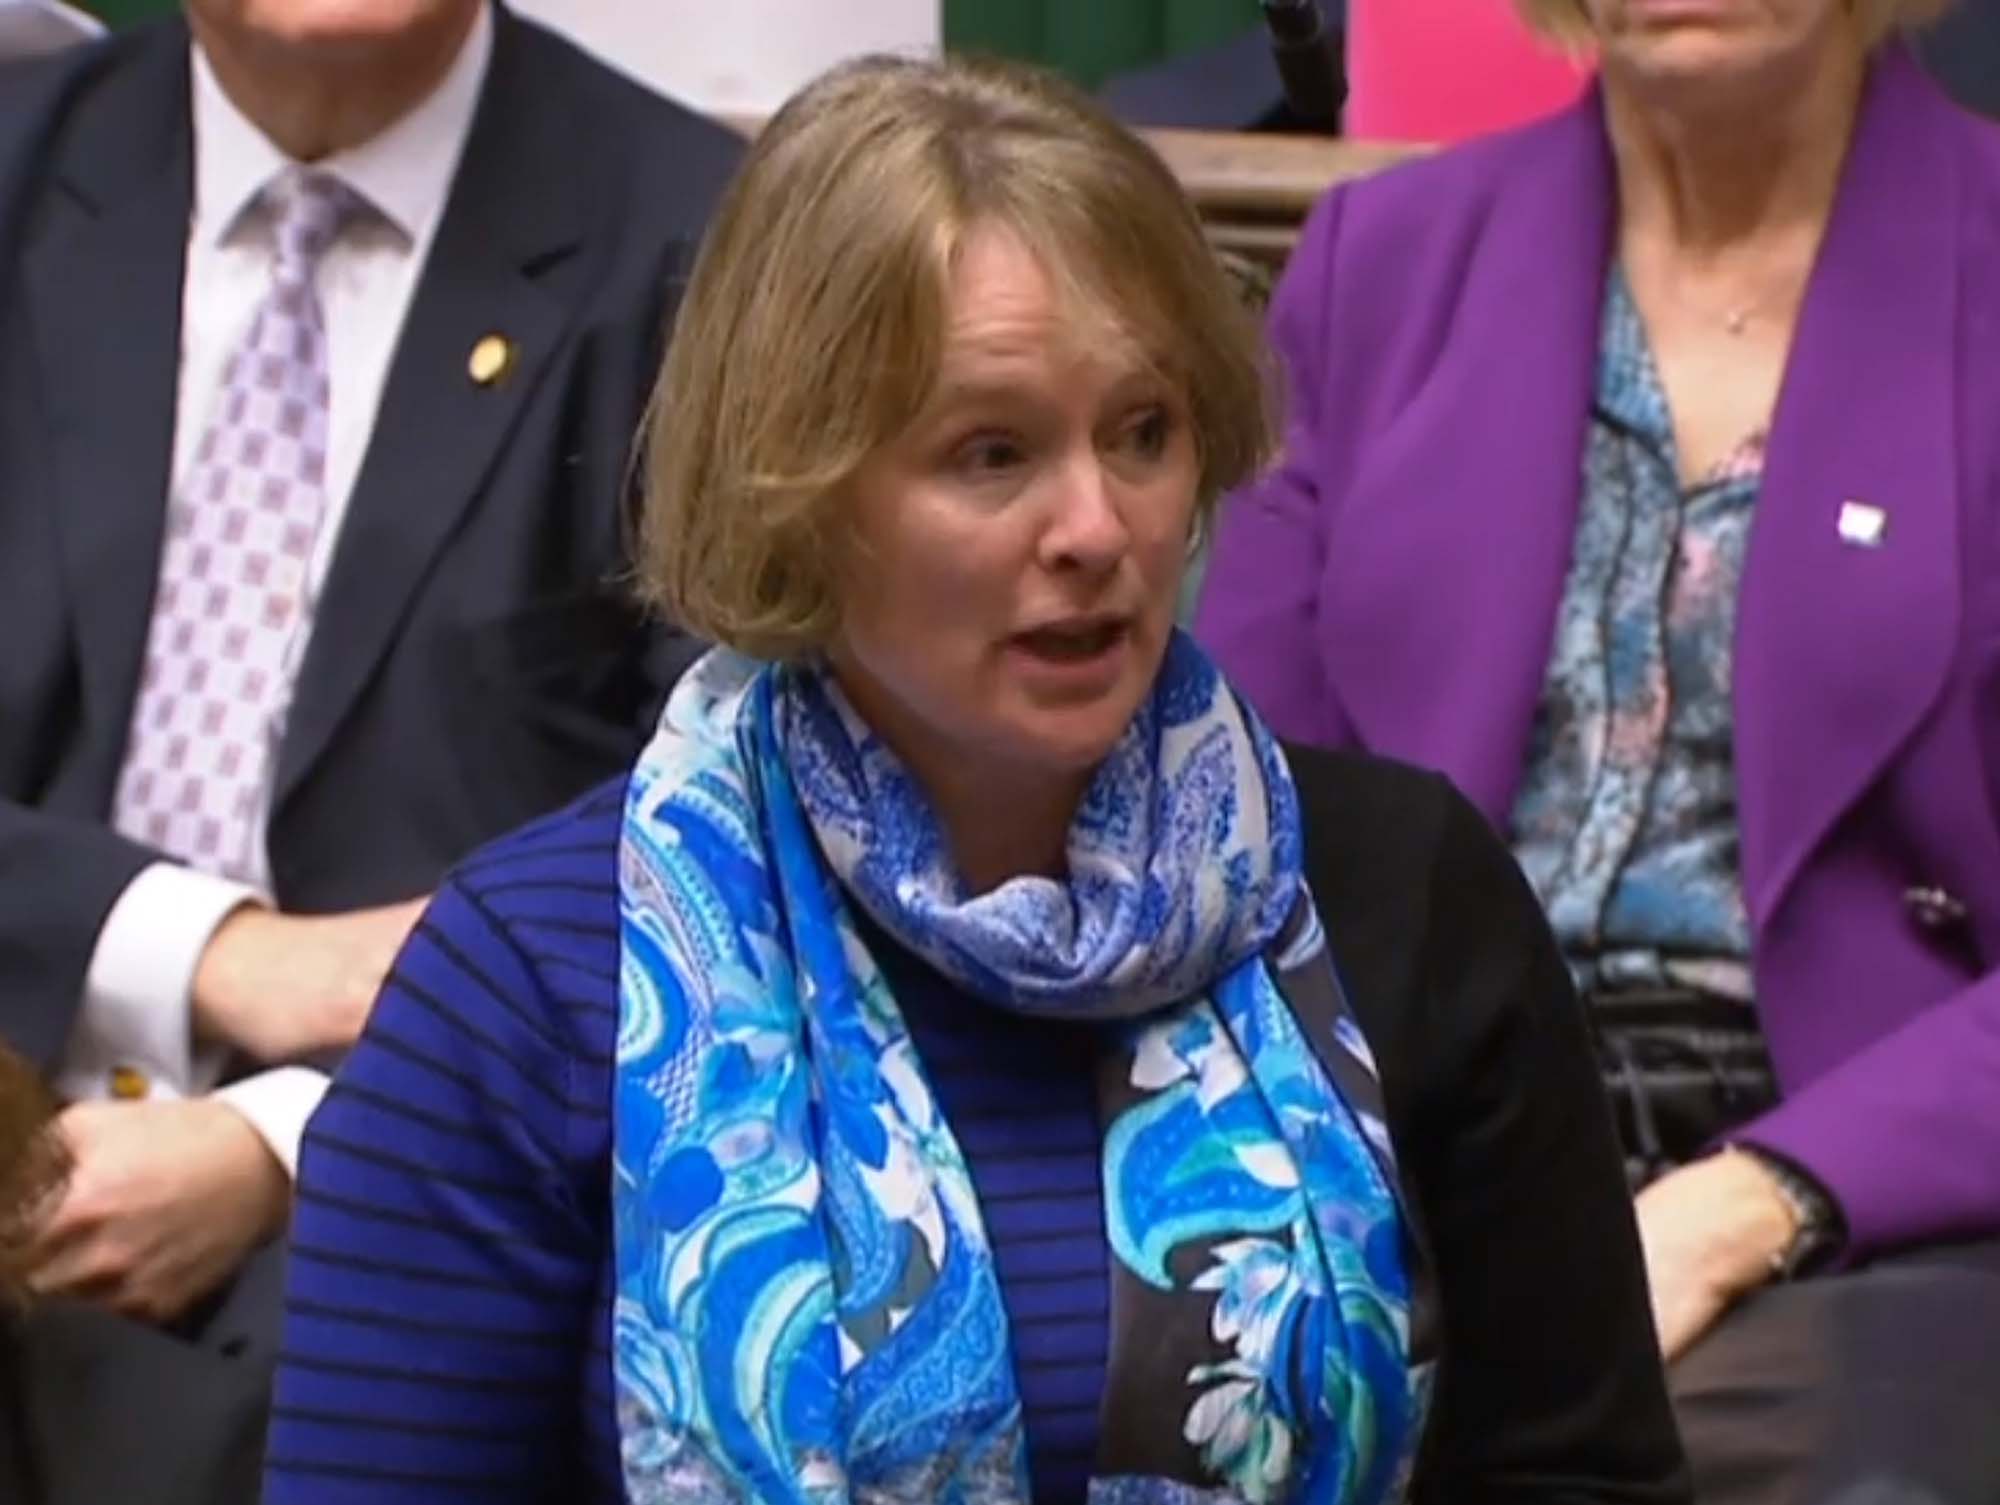 MP Vicky Ford is seen in the House of Commons during Prime Minister's Questions in December 2018.